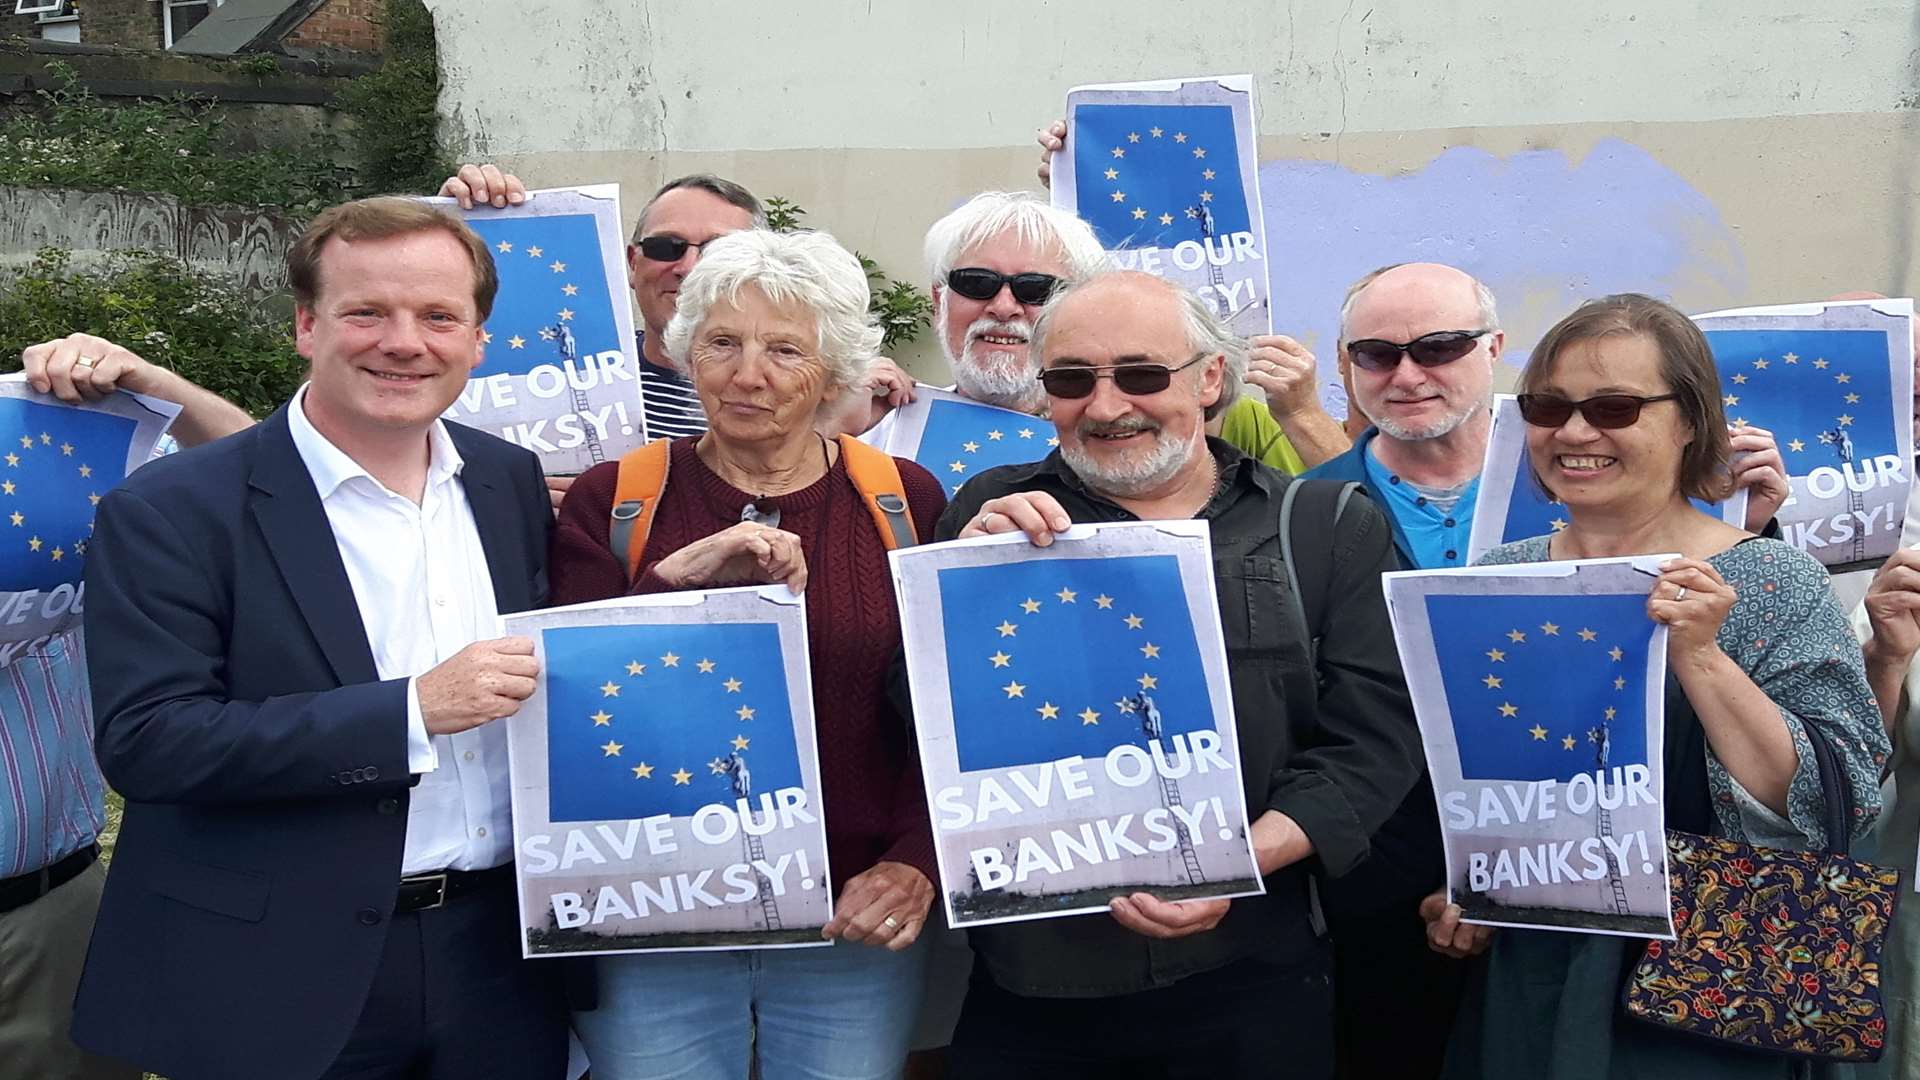 MP Charlie Elphicke and supporters at the launch of June's Save Our Banksy campaign